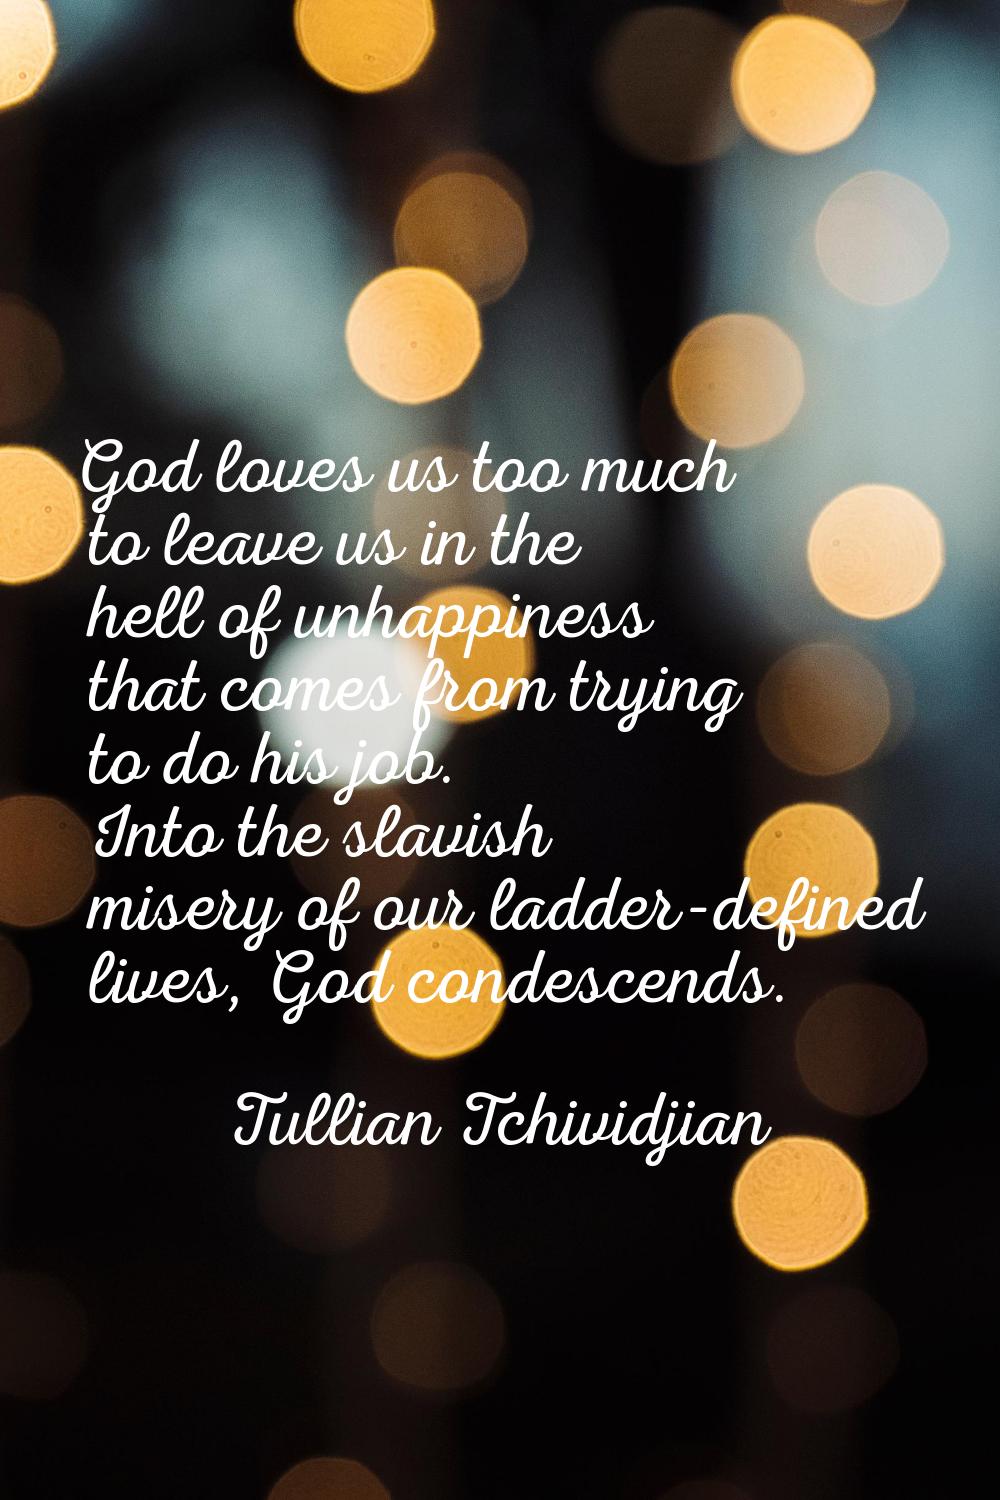 God loves us too much to leave us in the hell of unhappiness that comes from trying to do his job. 